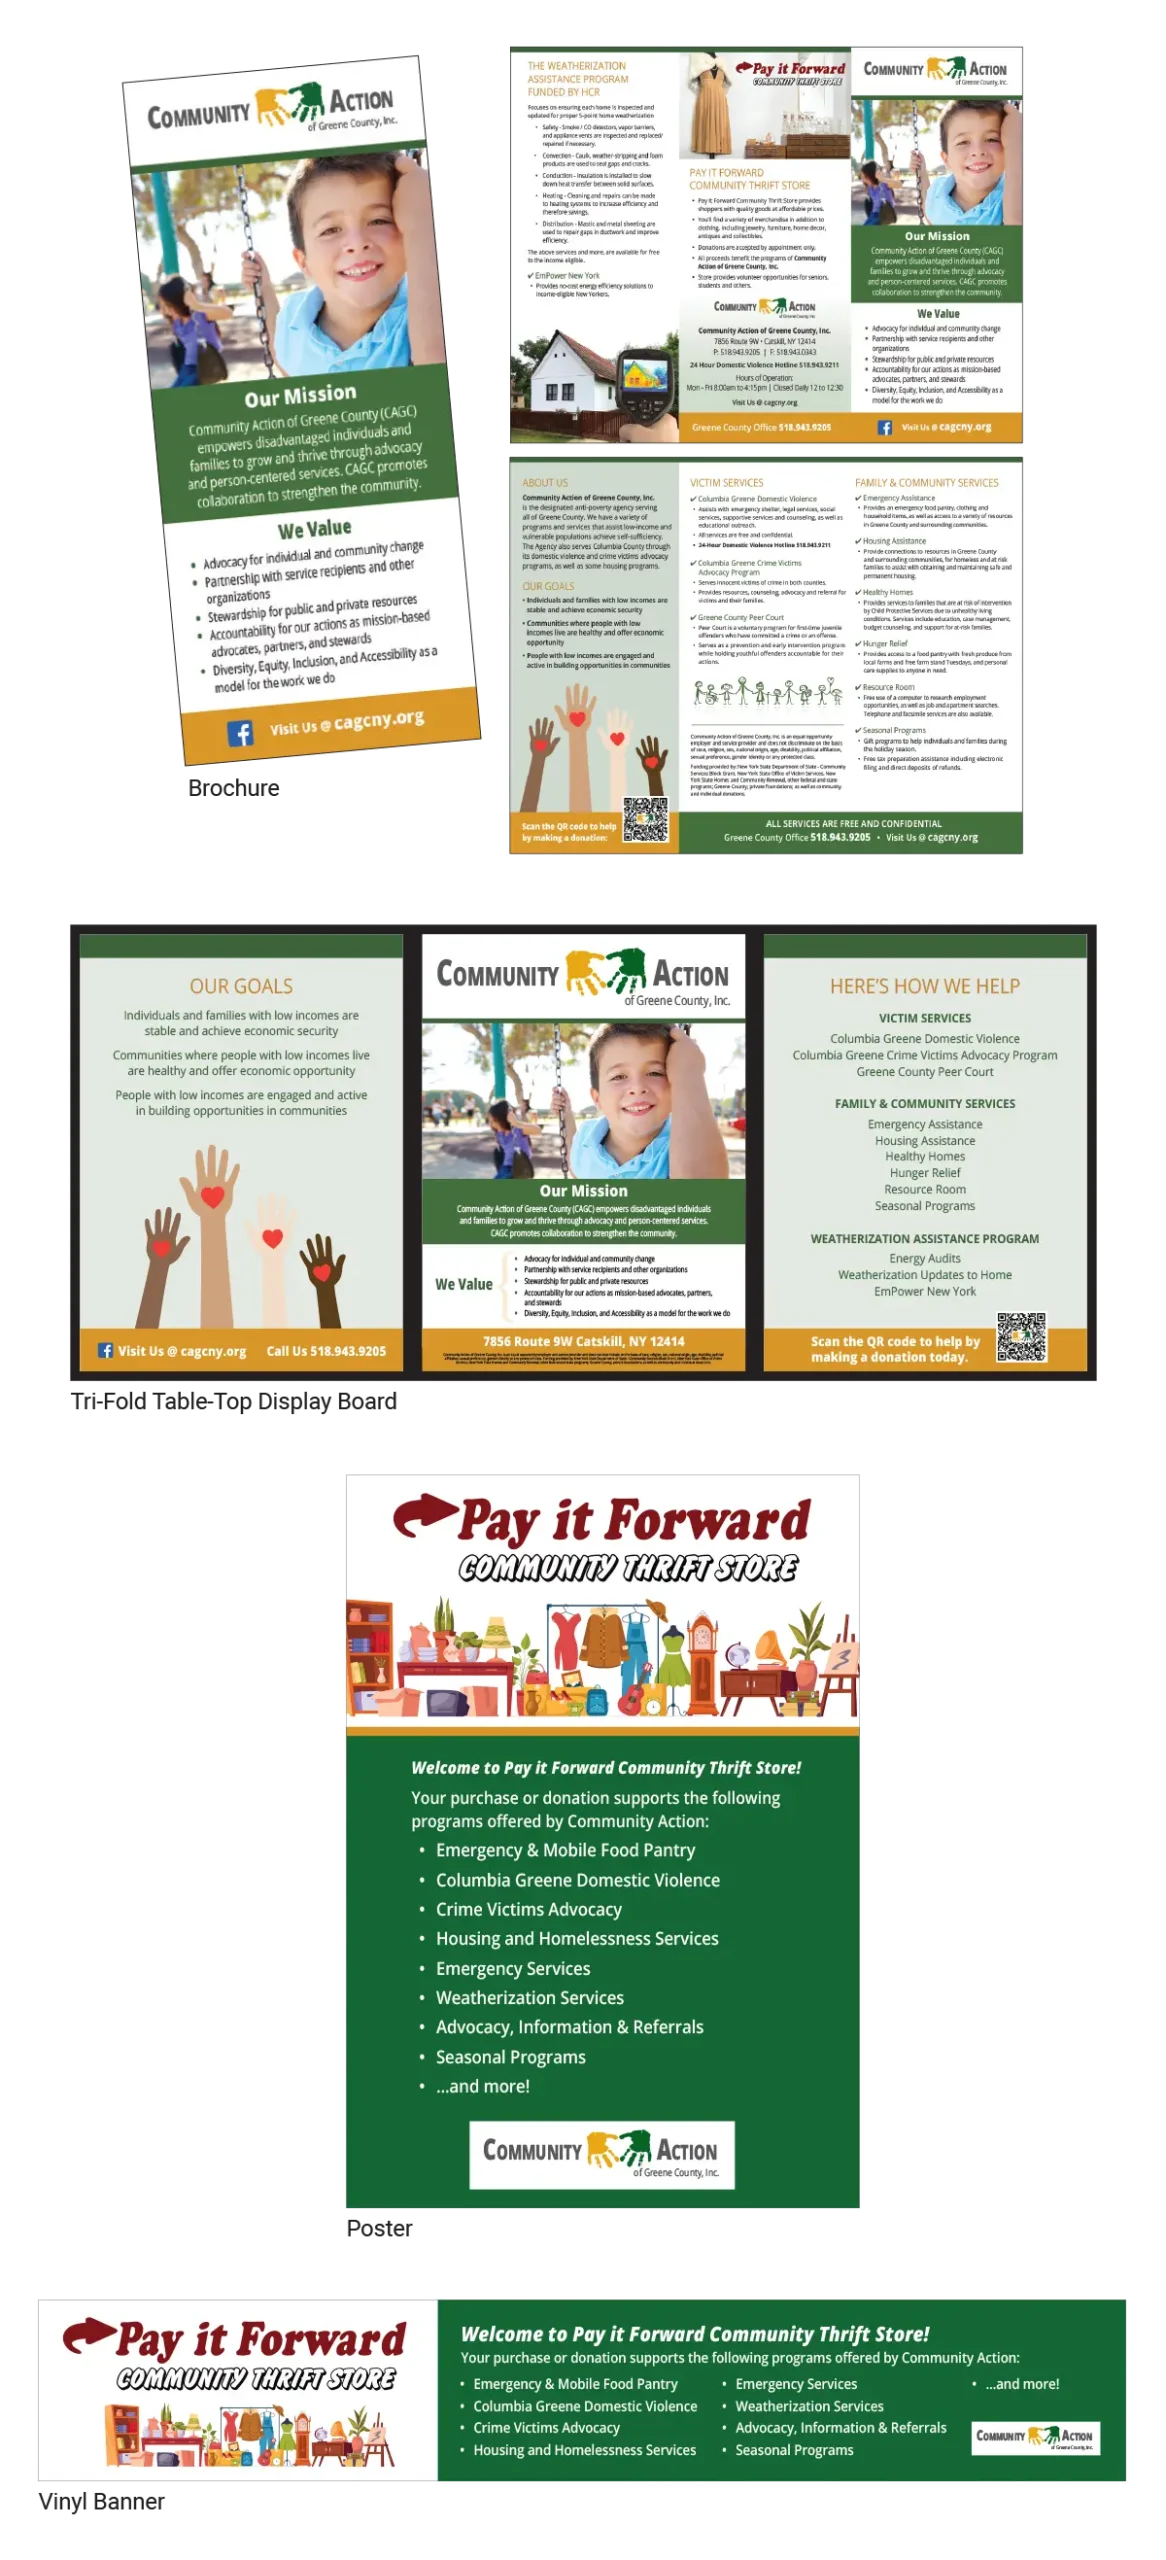 Community Action Collateral Materials